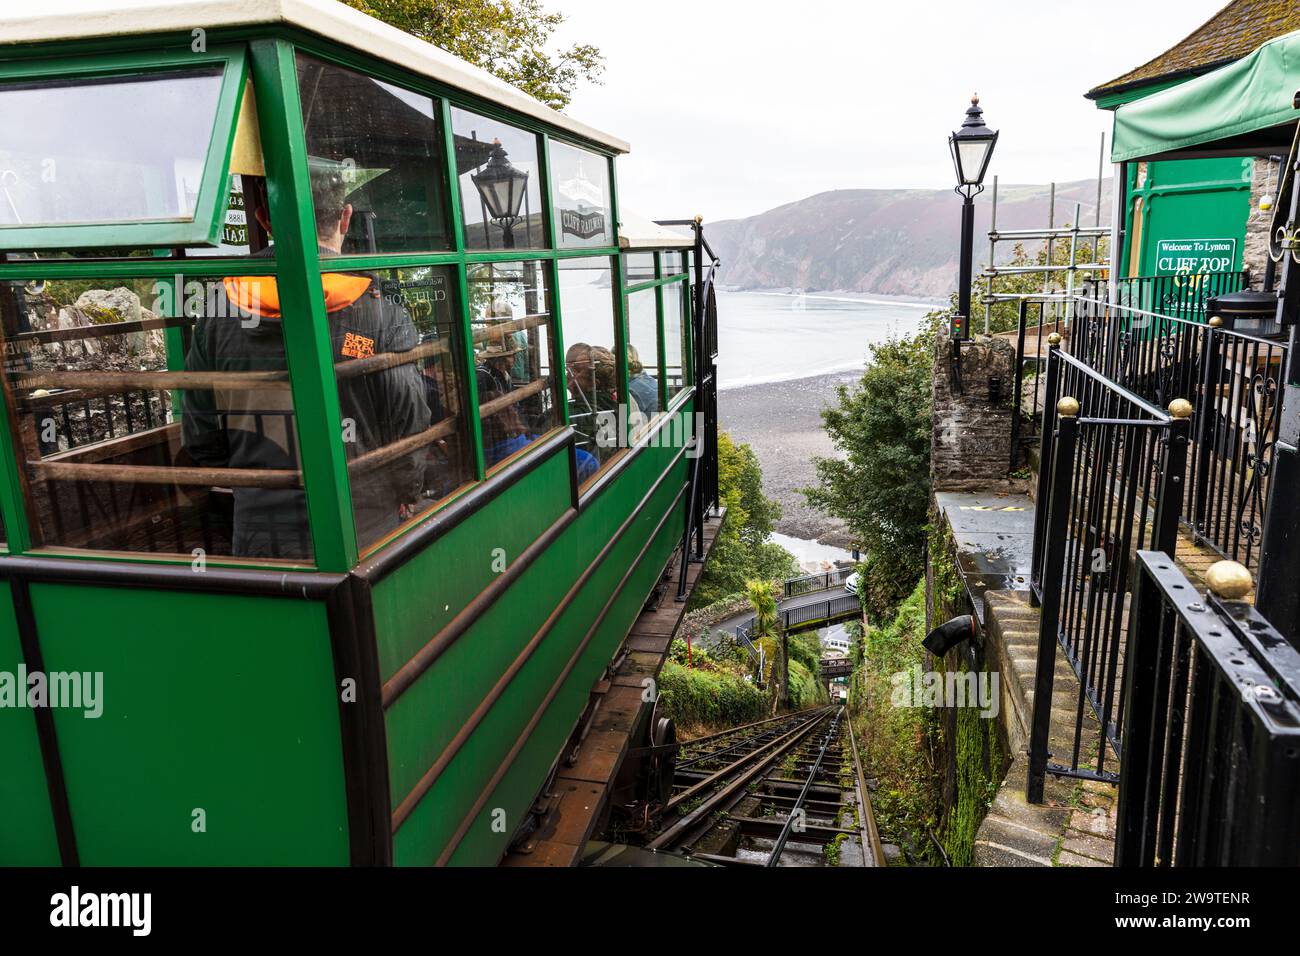 Lynton And Lynmouth Cliff Railway, Lynton And Lynmouth, Devon, UK, England, Lynton & Lynmouth Cliff Railway,Lynton & Lynmouth, Cliff Railway, funicula Stock Photo